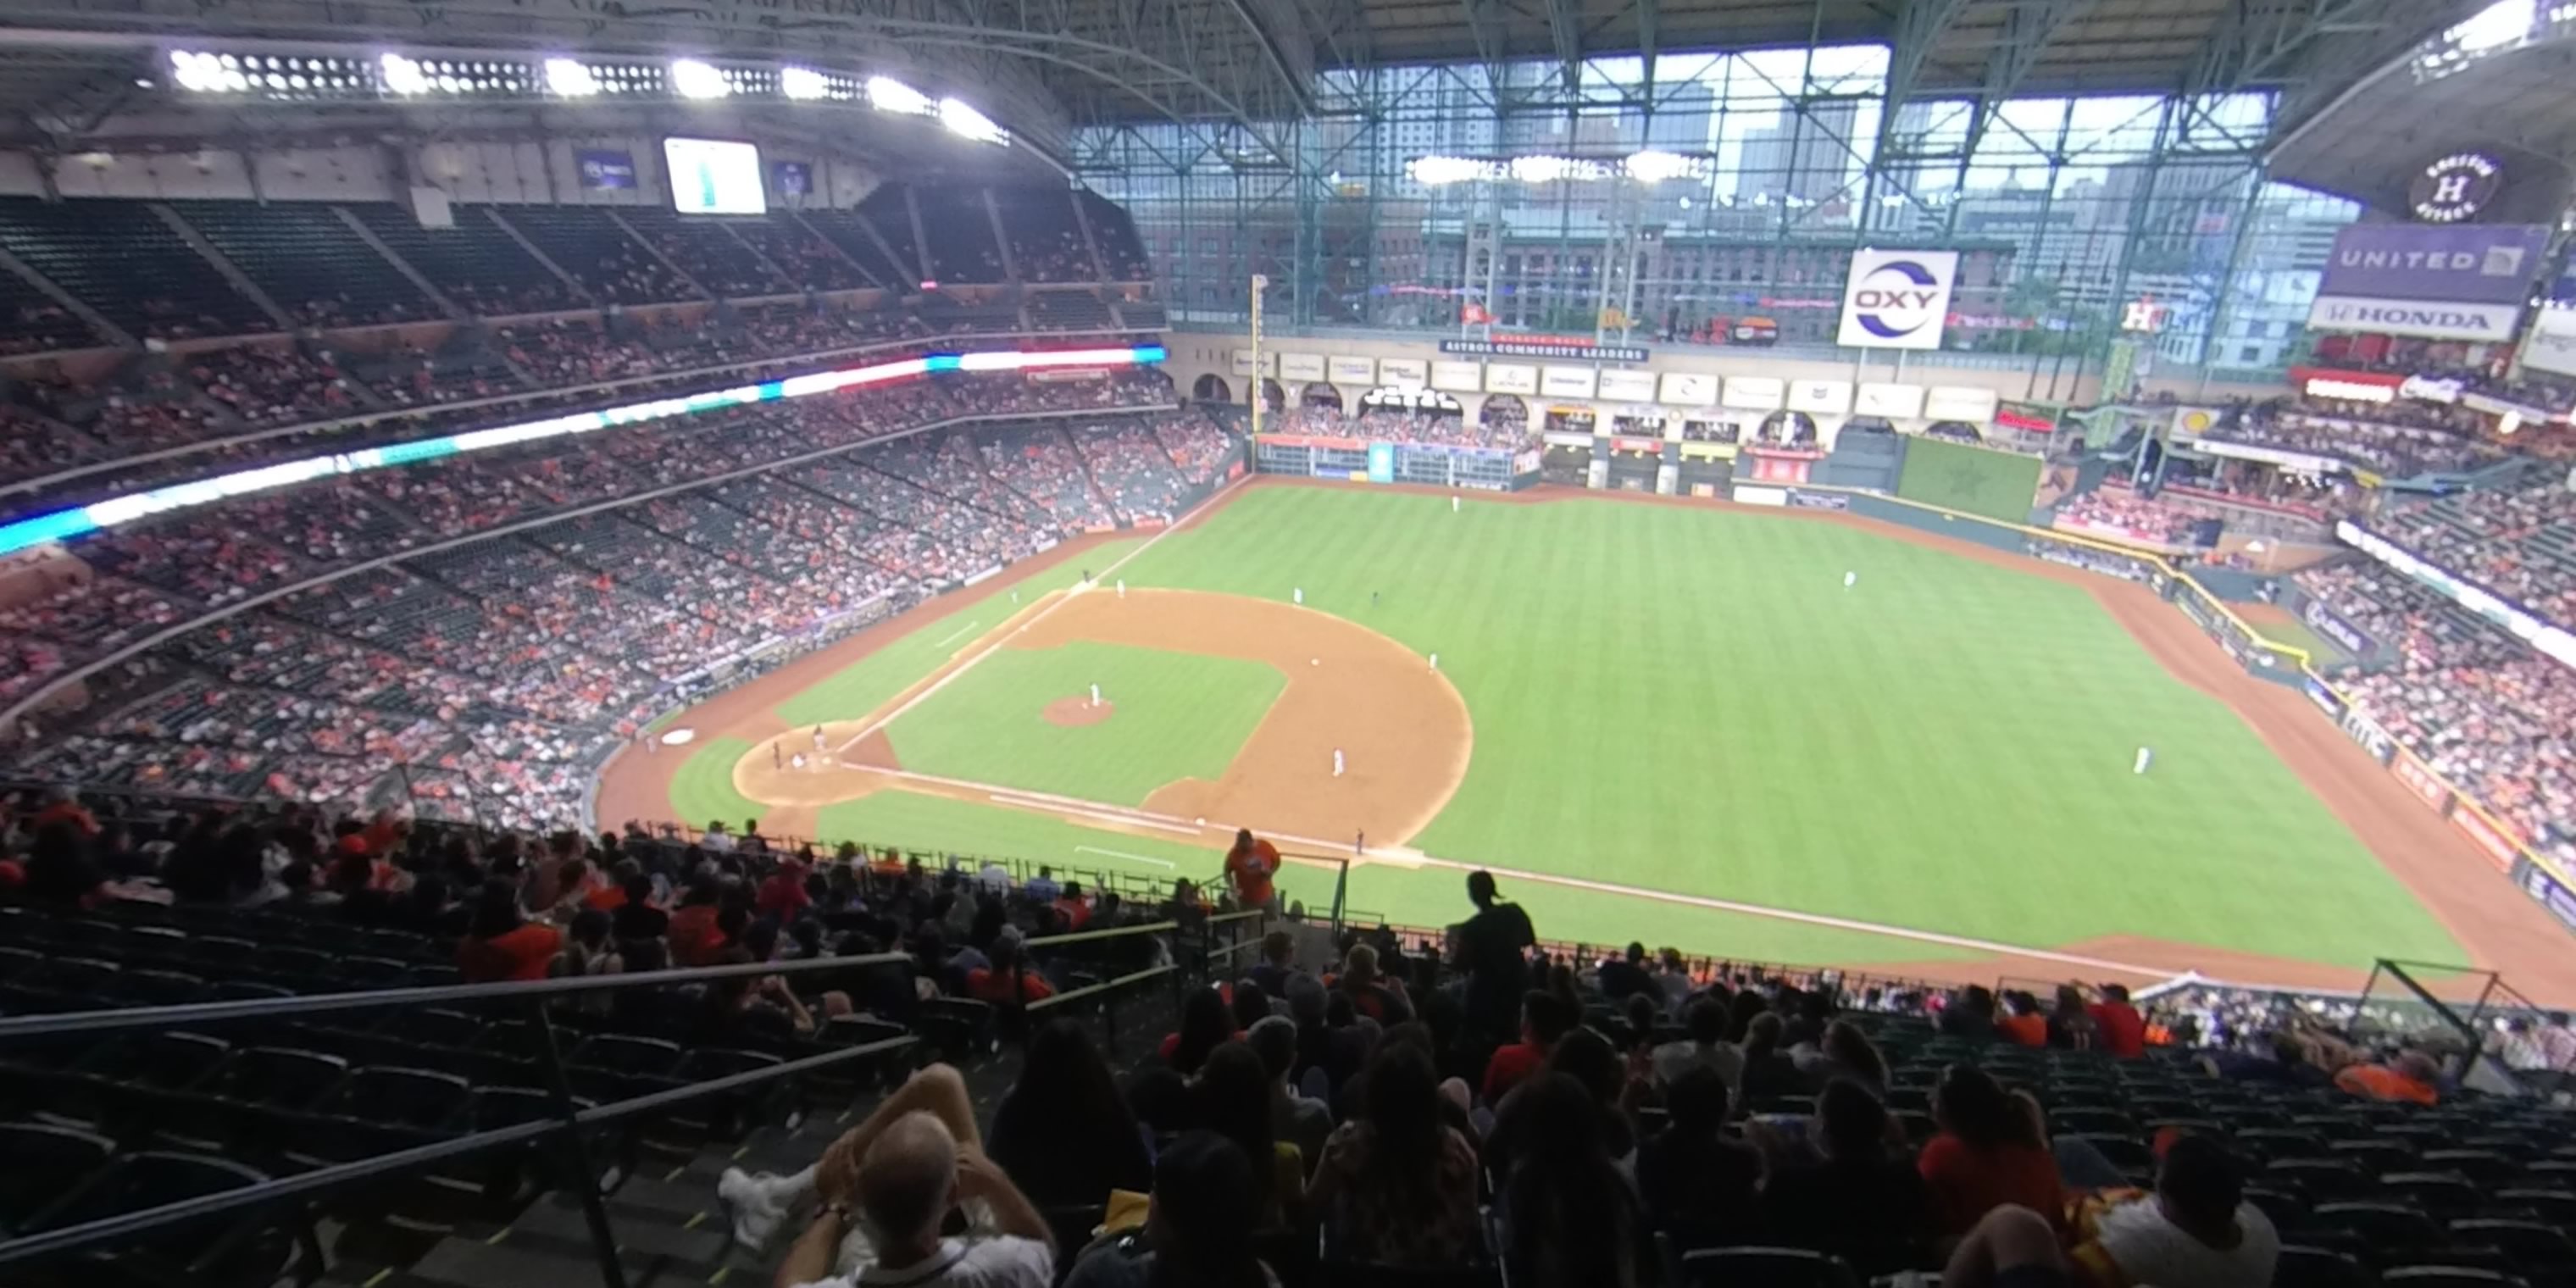 section 425 panoramic seat view  for baseball - minute maid park